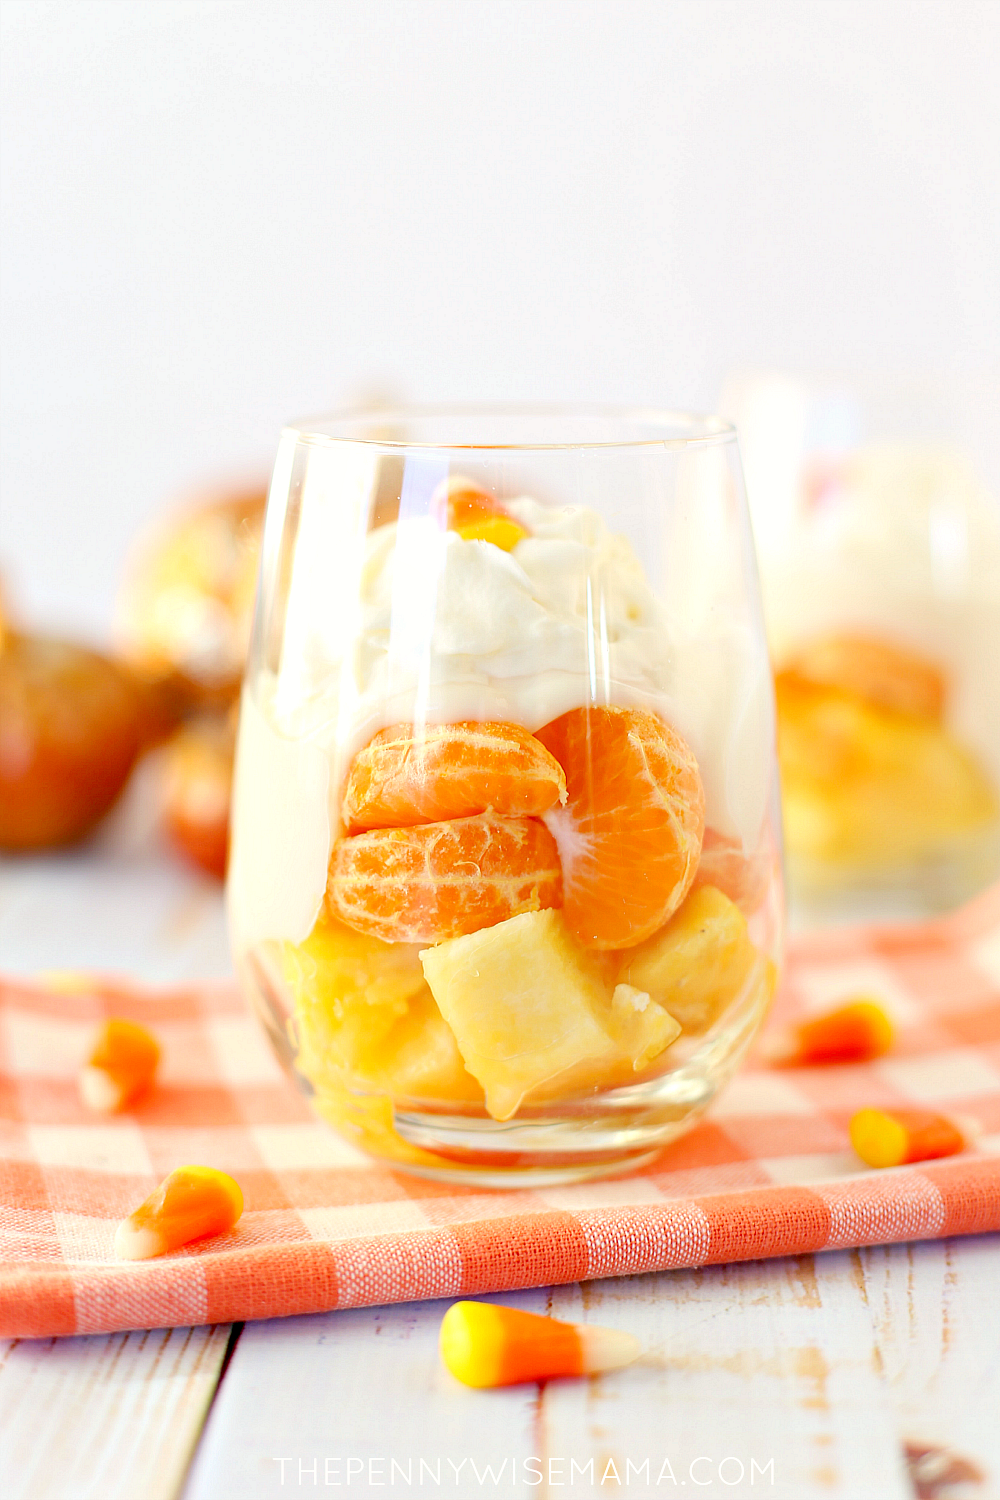 Candy Corn Fruit Parfaits - a yummy, tooth-friendly treat!